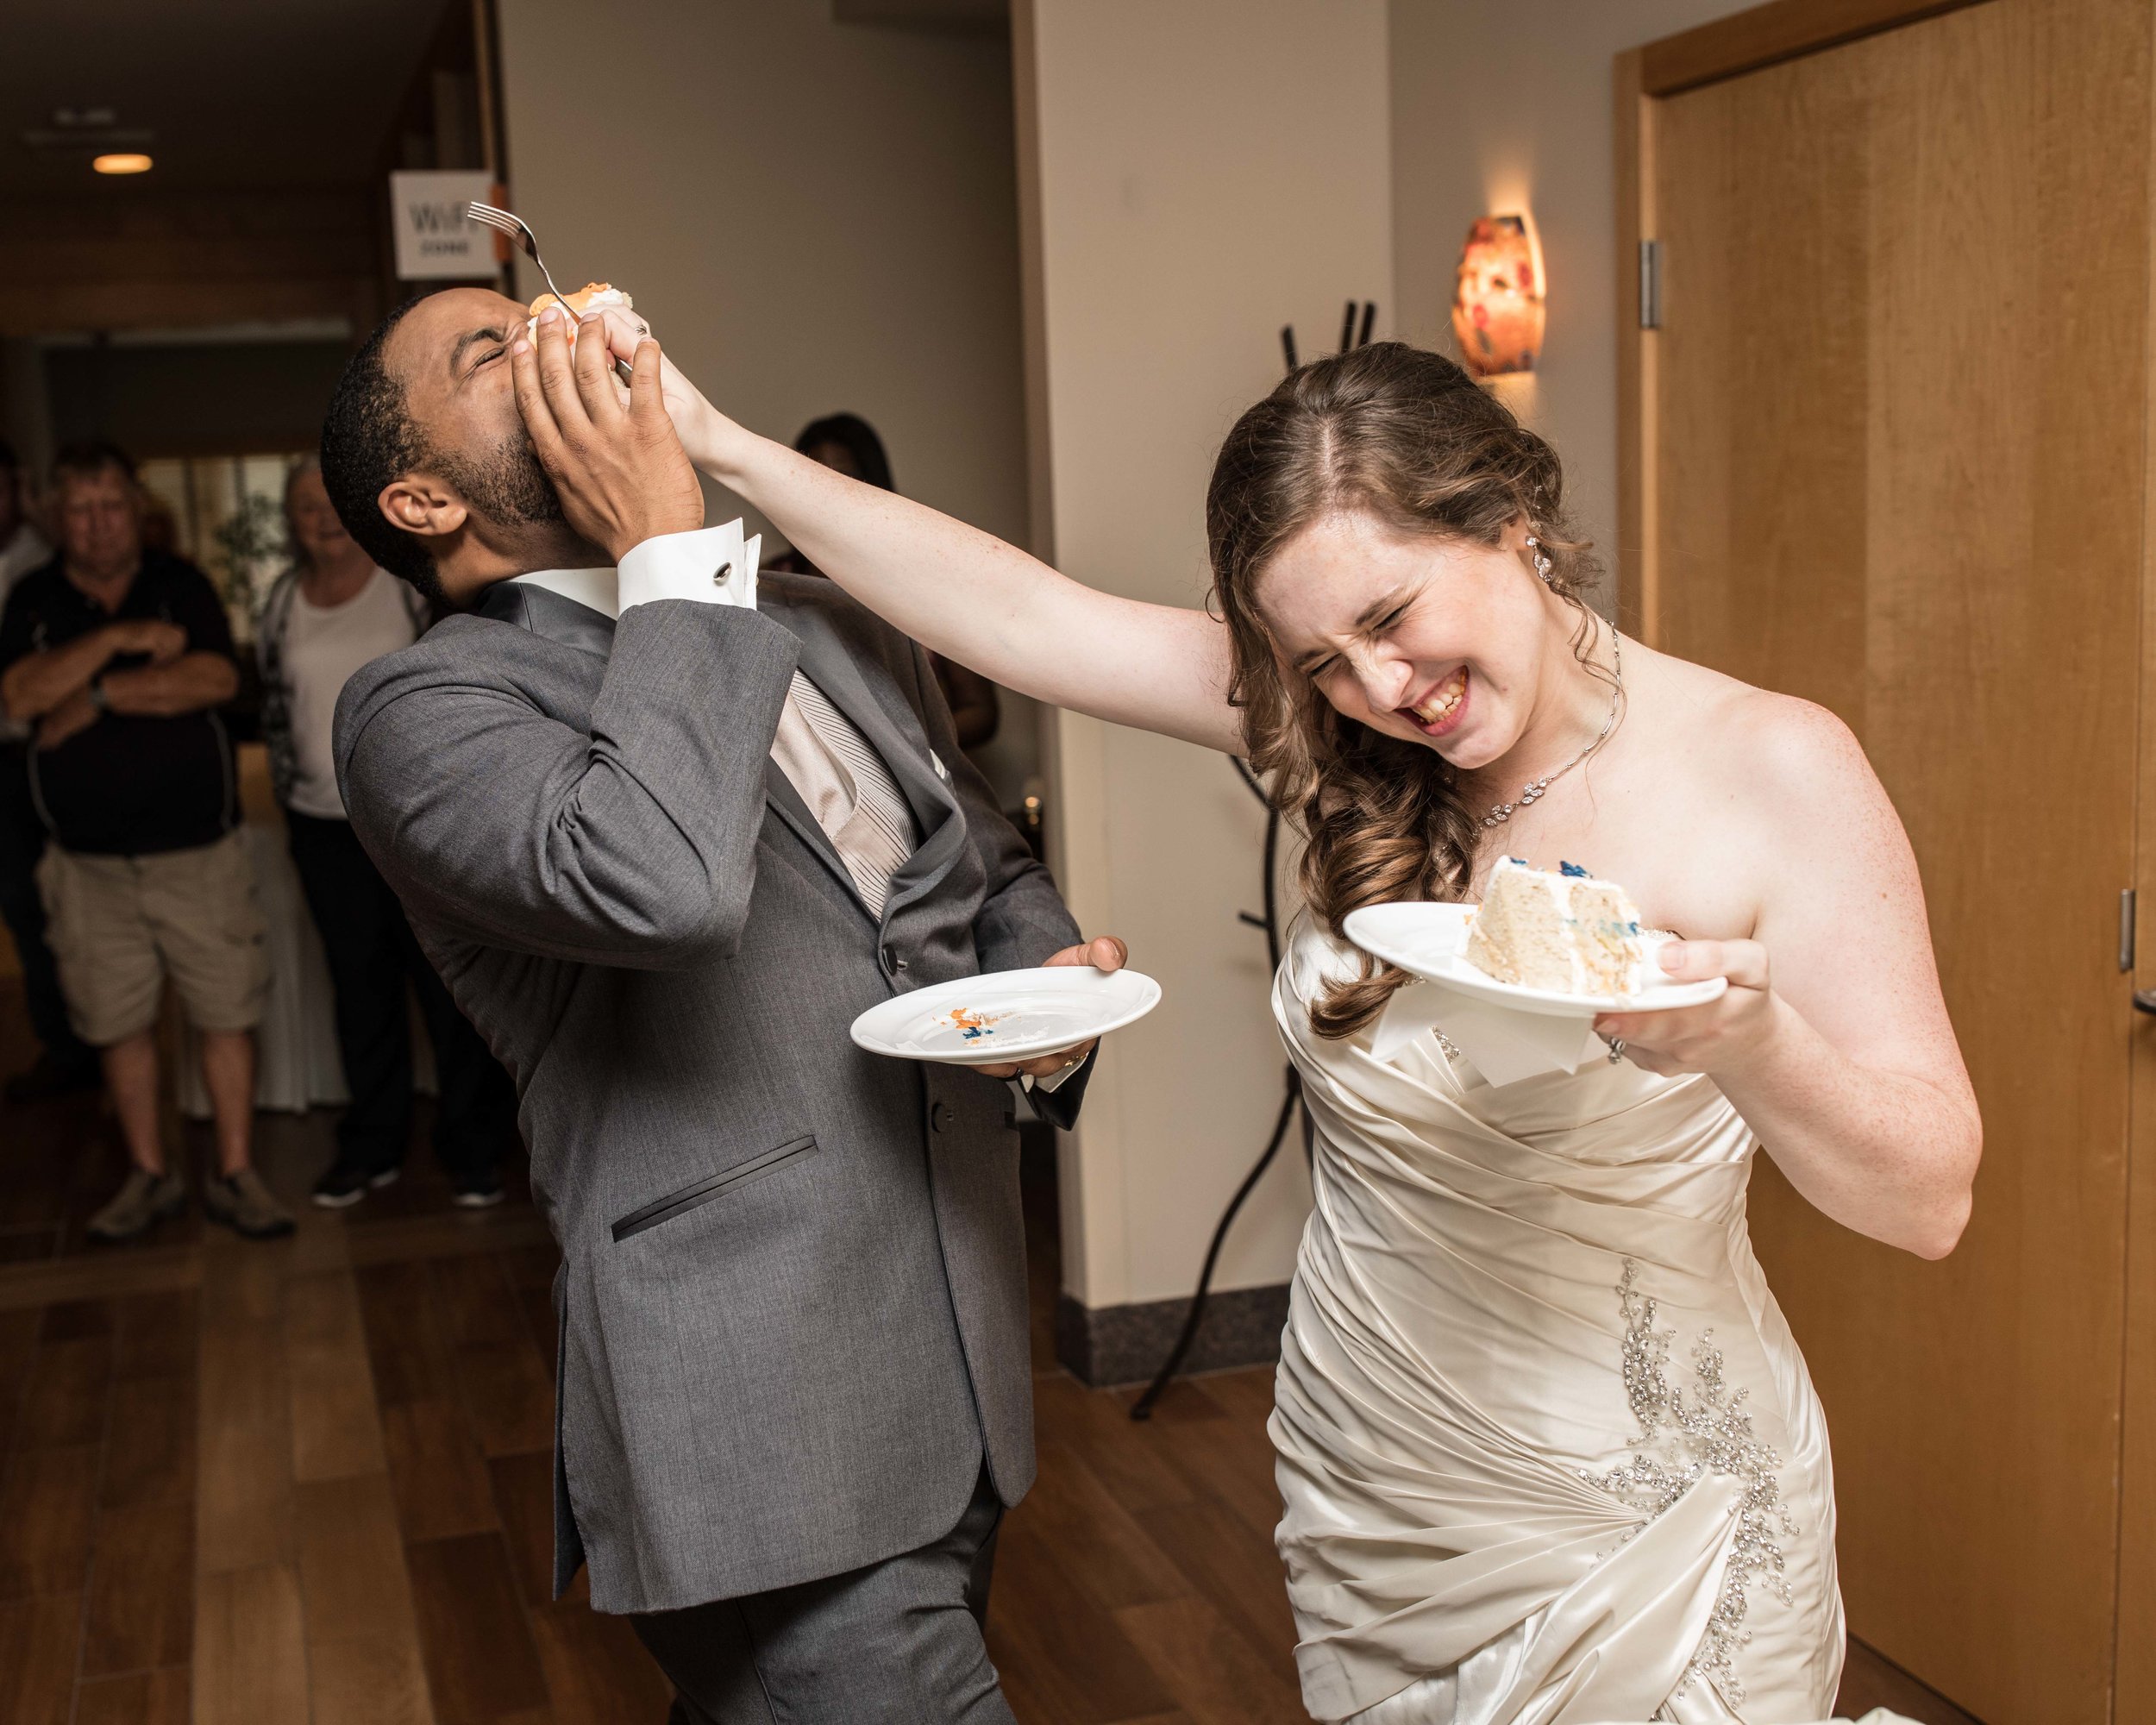  the bride smashes cake in the groom’s face during cake cutting 